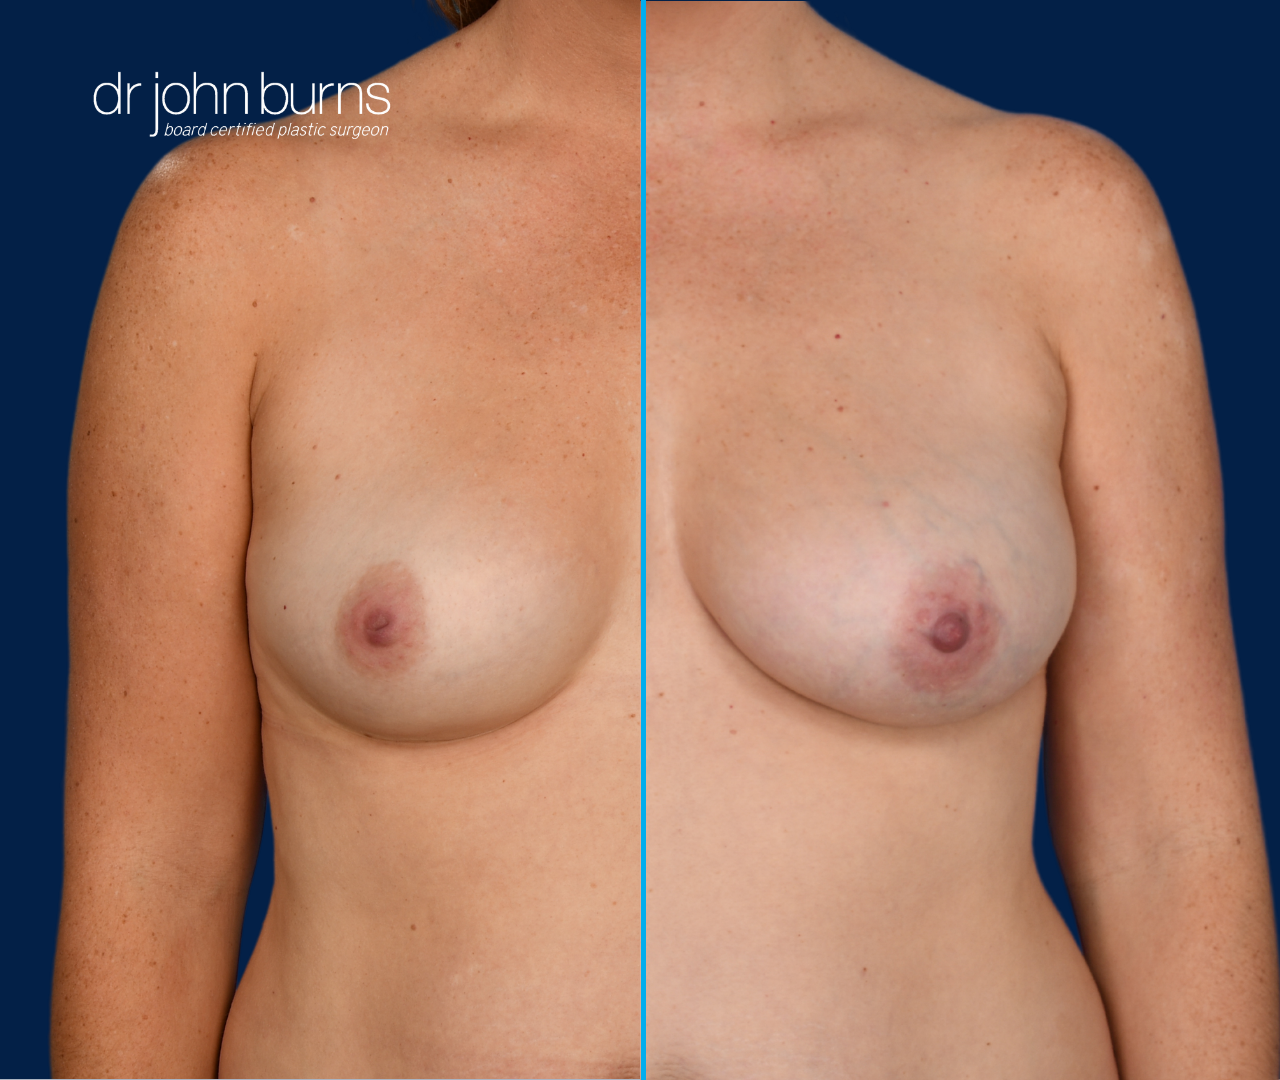 case 10- split screen before & after fat transfer to breast by top plastic surgeon, Dr. John Burns